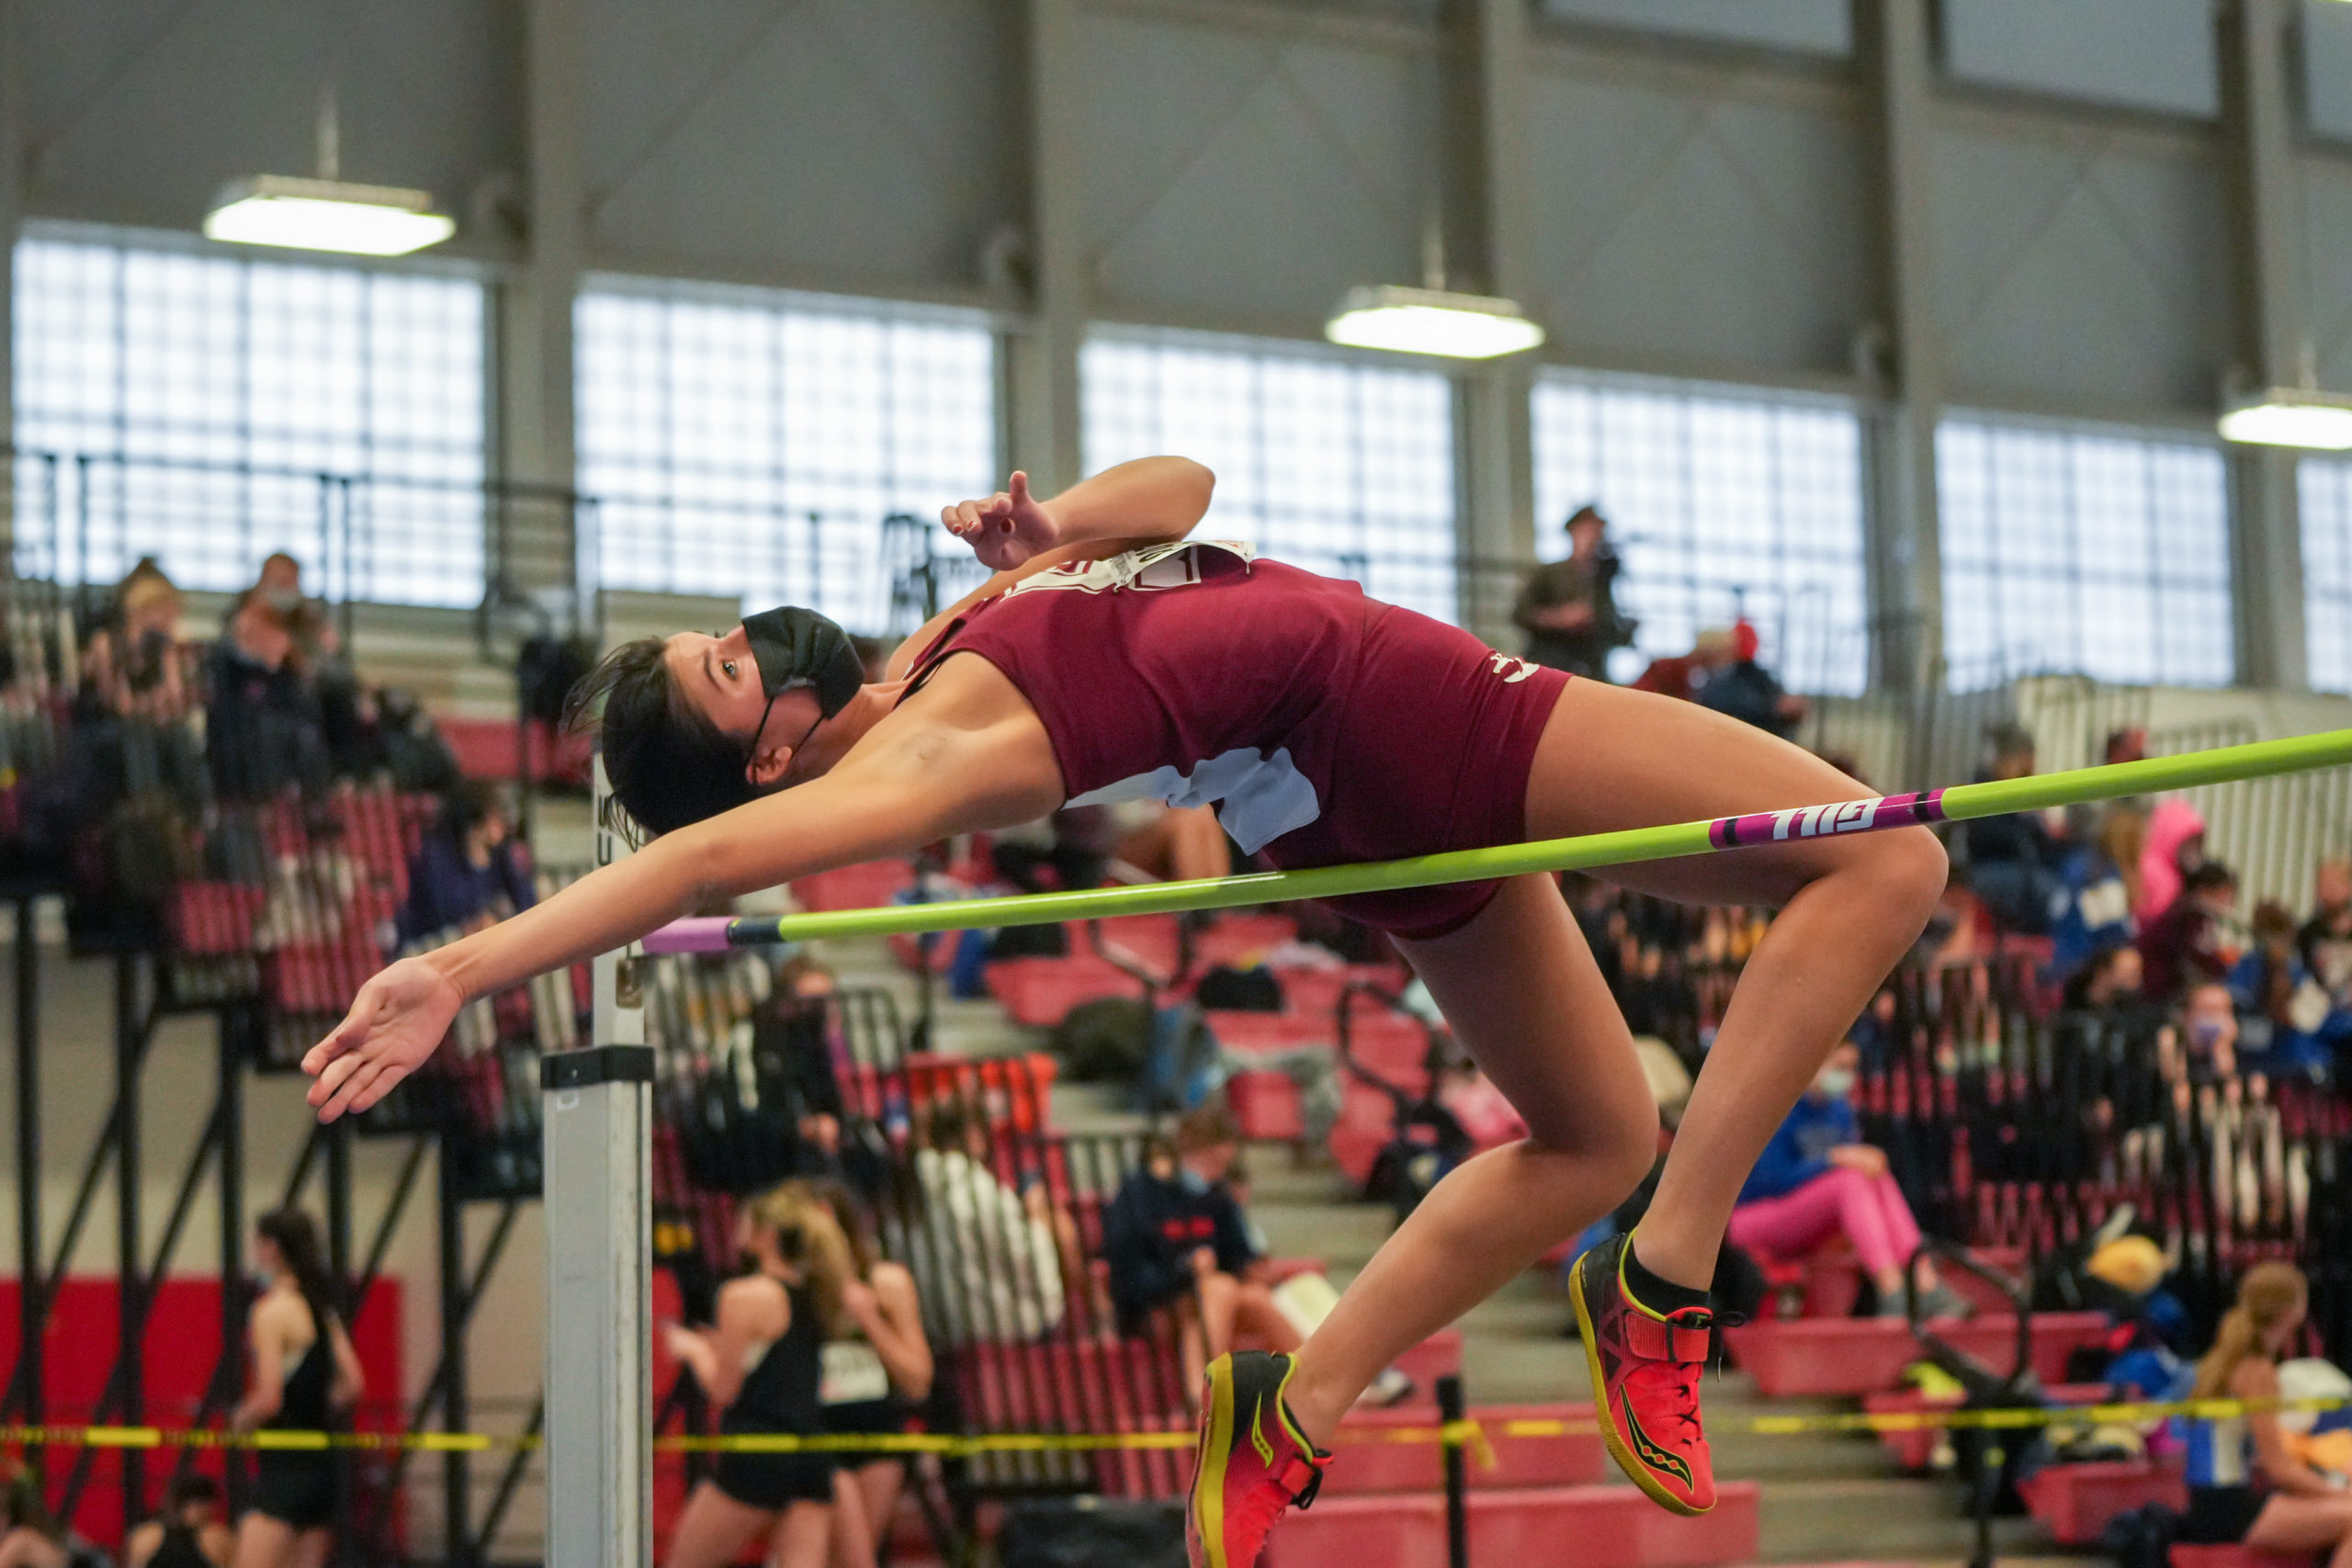 Southampton's Bridget Ferguson was one of just two girls at the Zeitler Relays to reach 5 feet in the high jump.